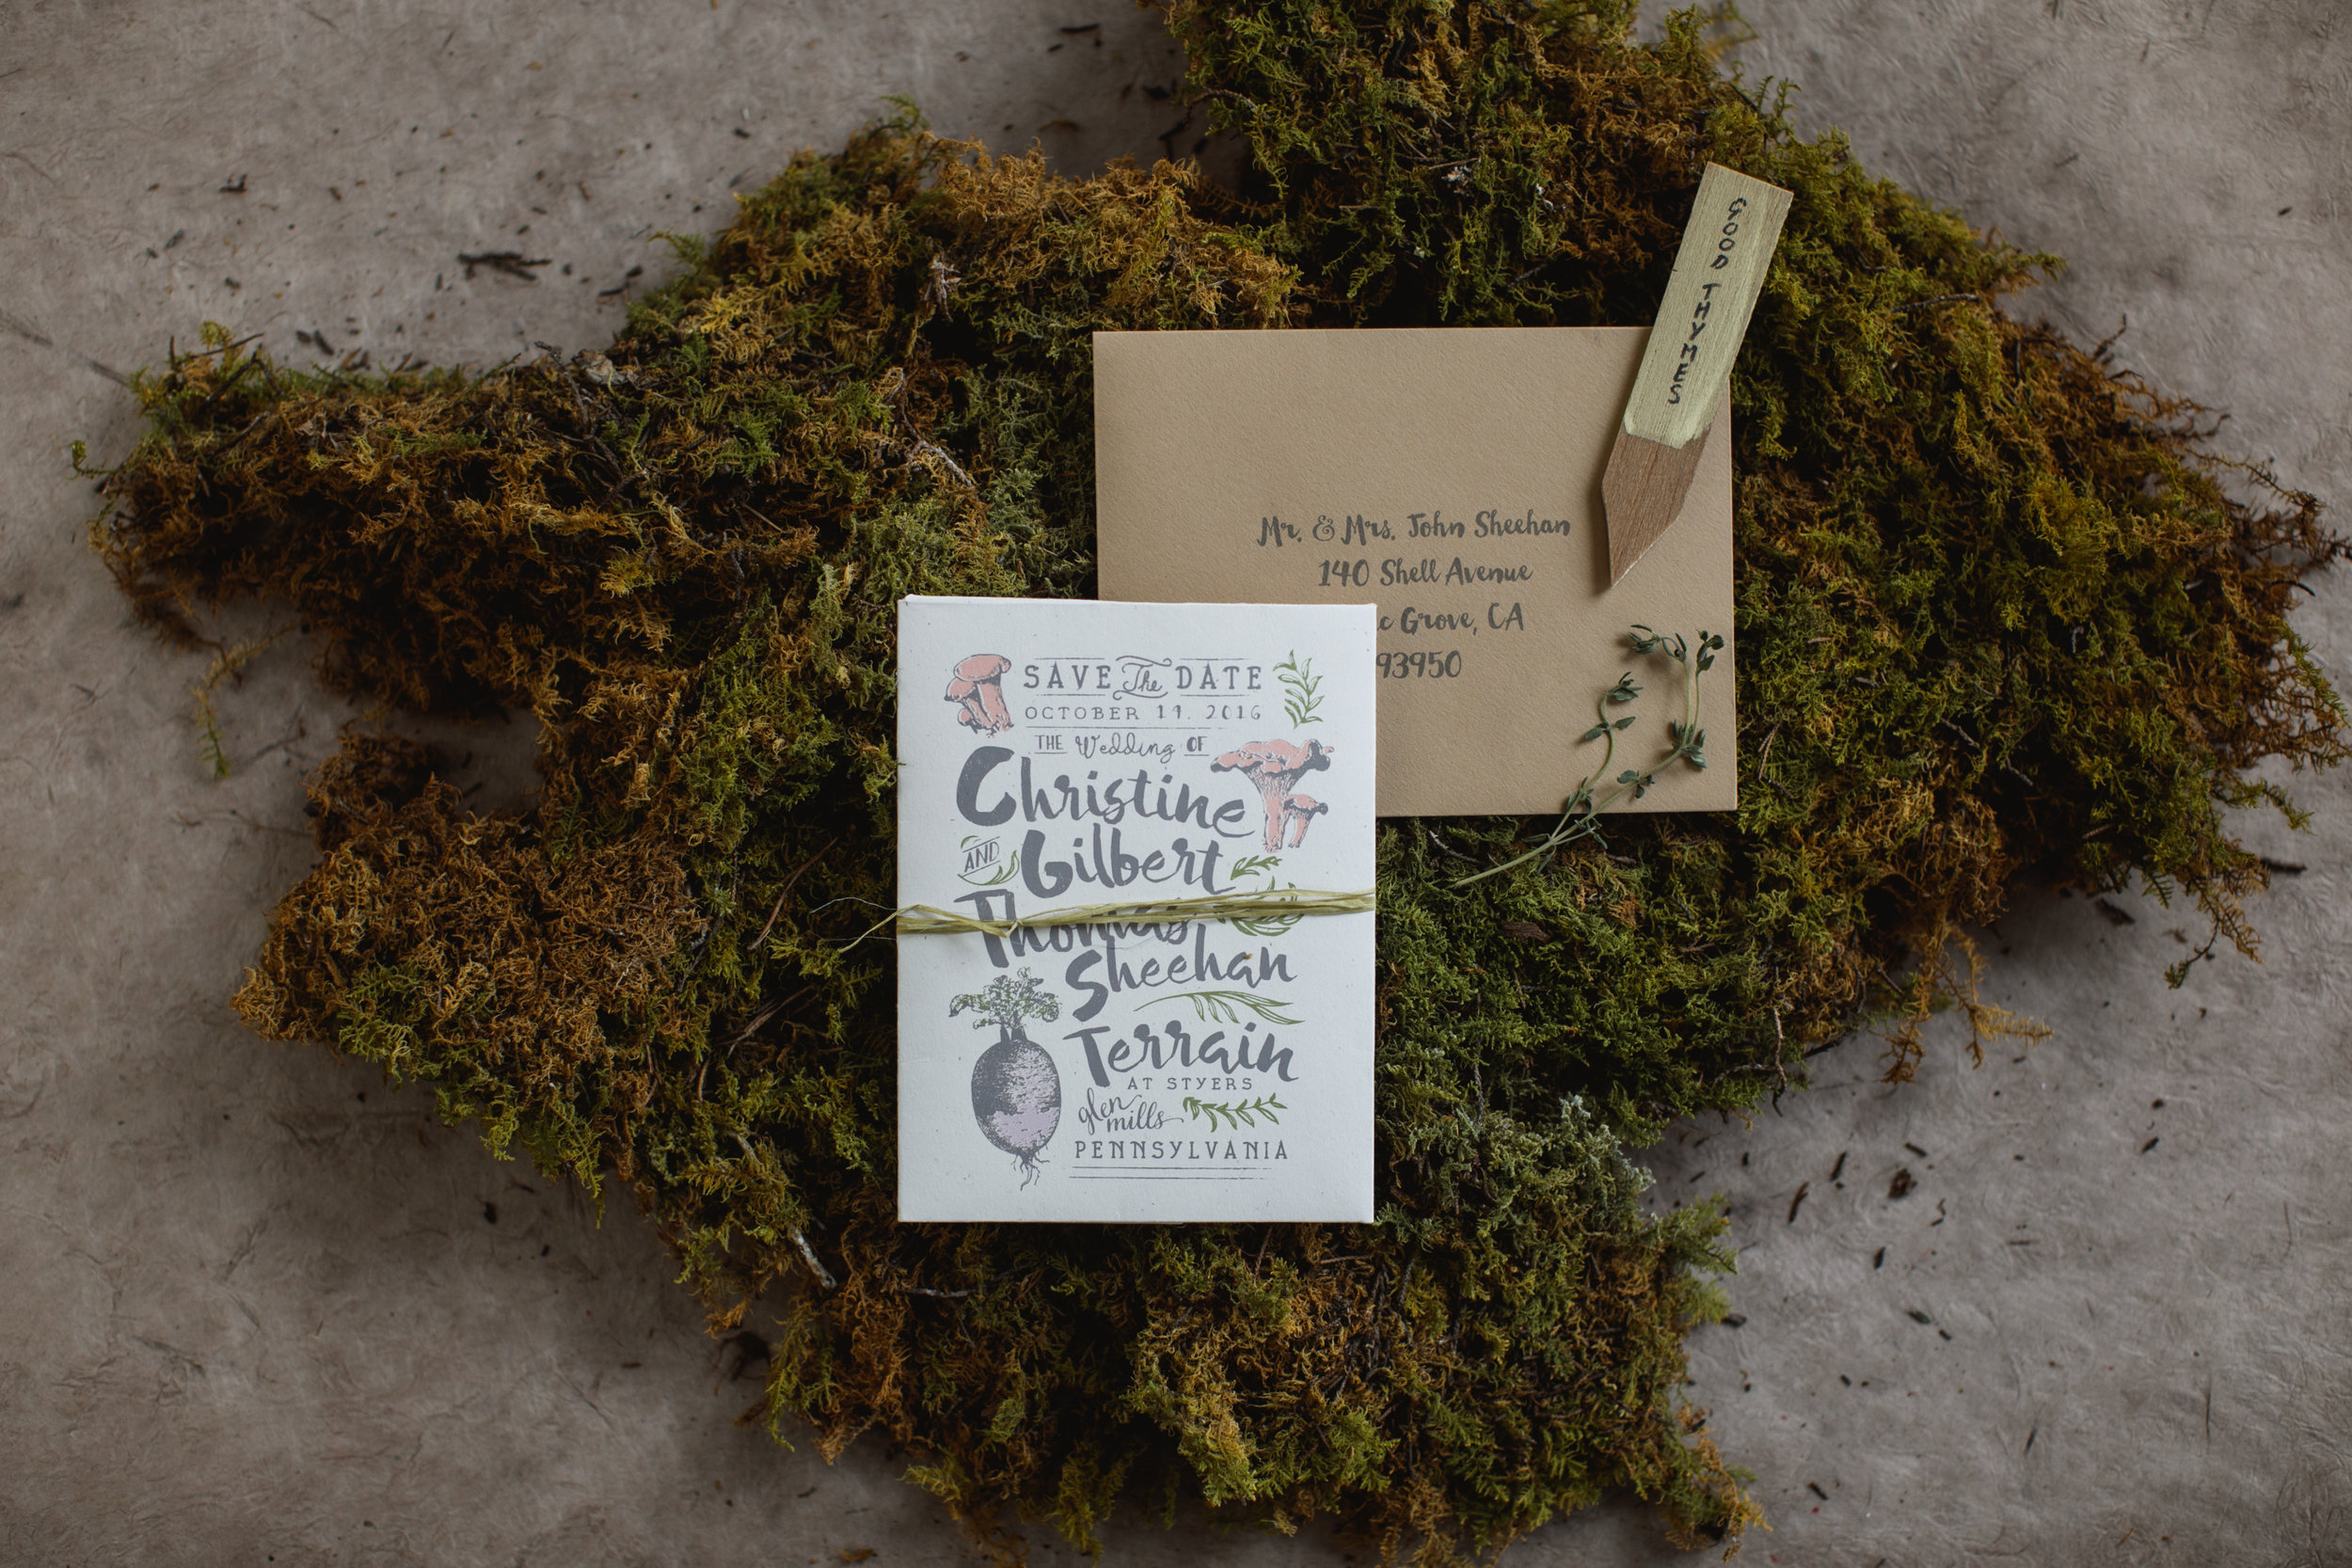  The save the date we created was actually a seed packet that contained thyme seeds giving a nod to the location. We tucked in a wood plant marker with the words "Good Thymes" just to be punny! 